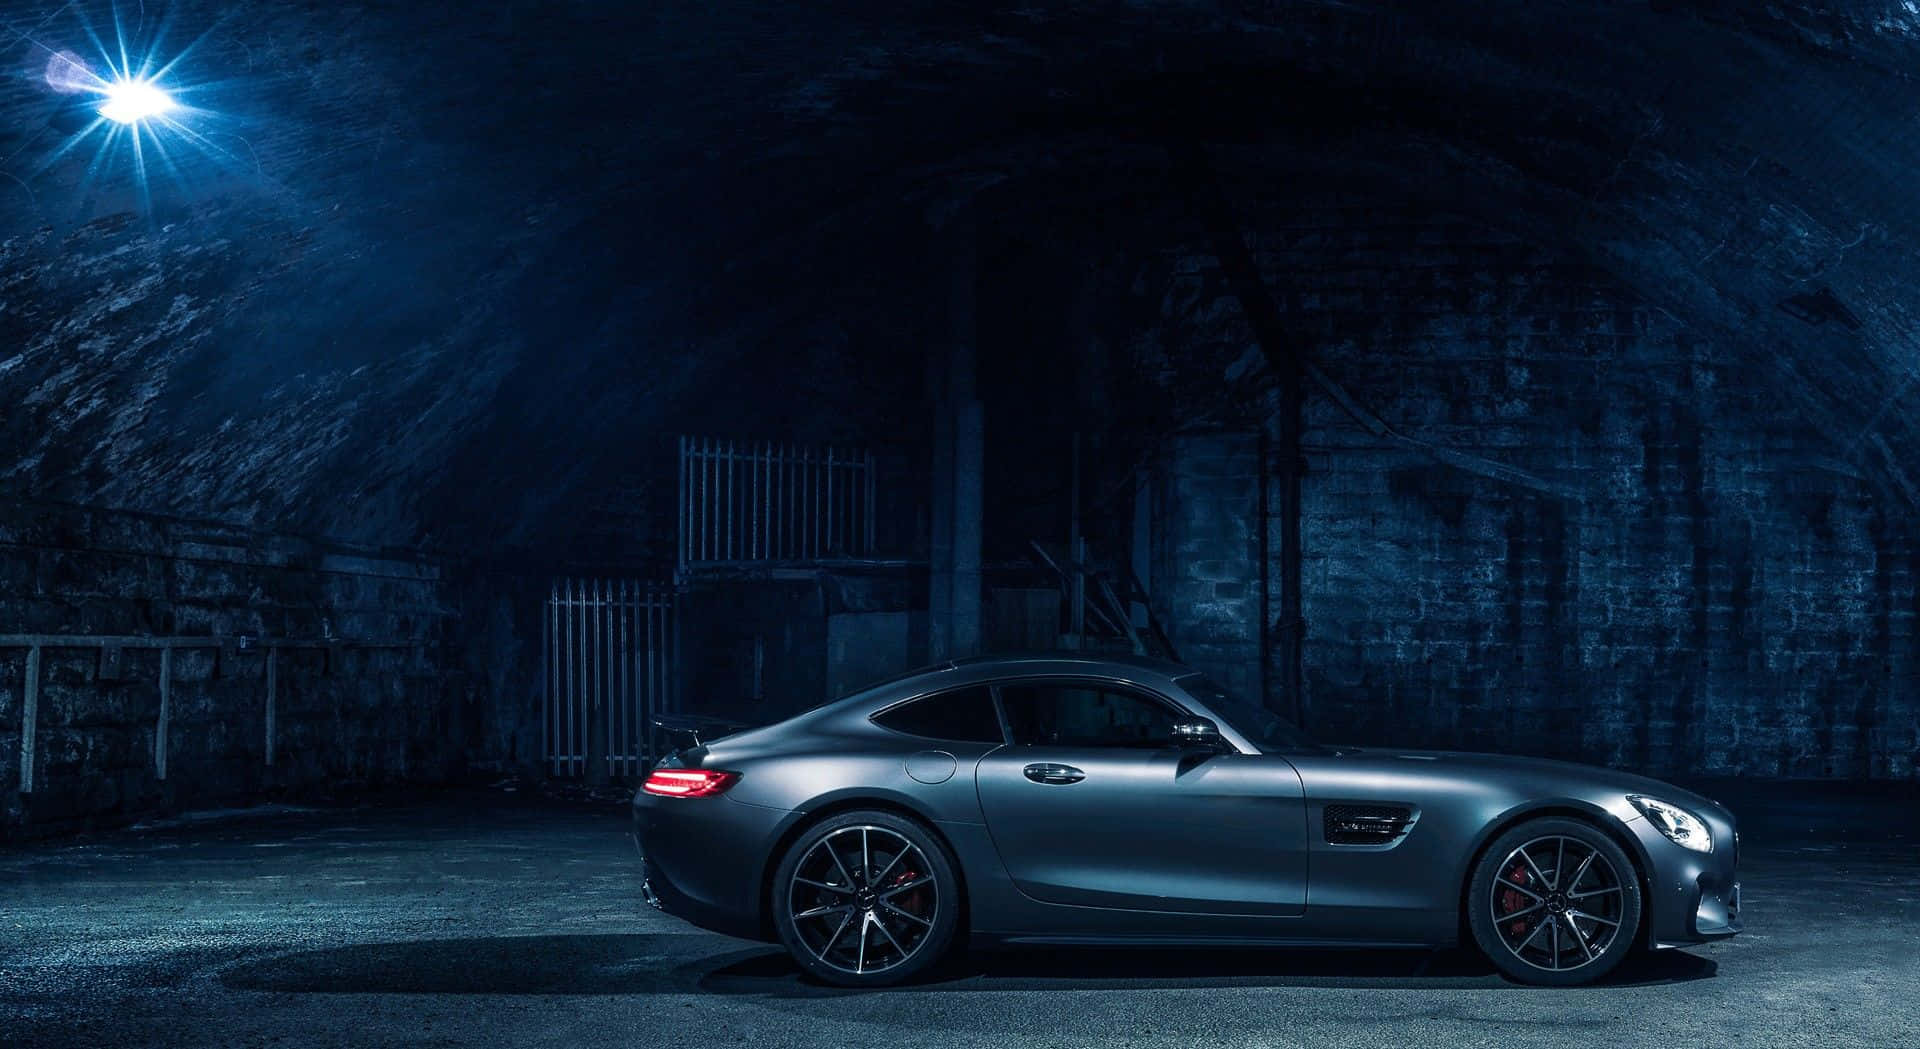 Mercedes Amg Gt In Tunnel Wallpaper